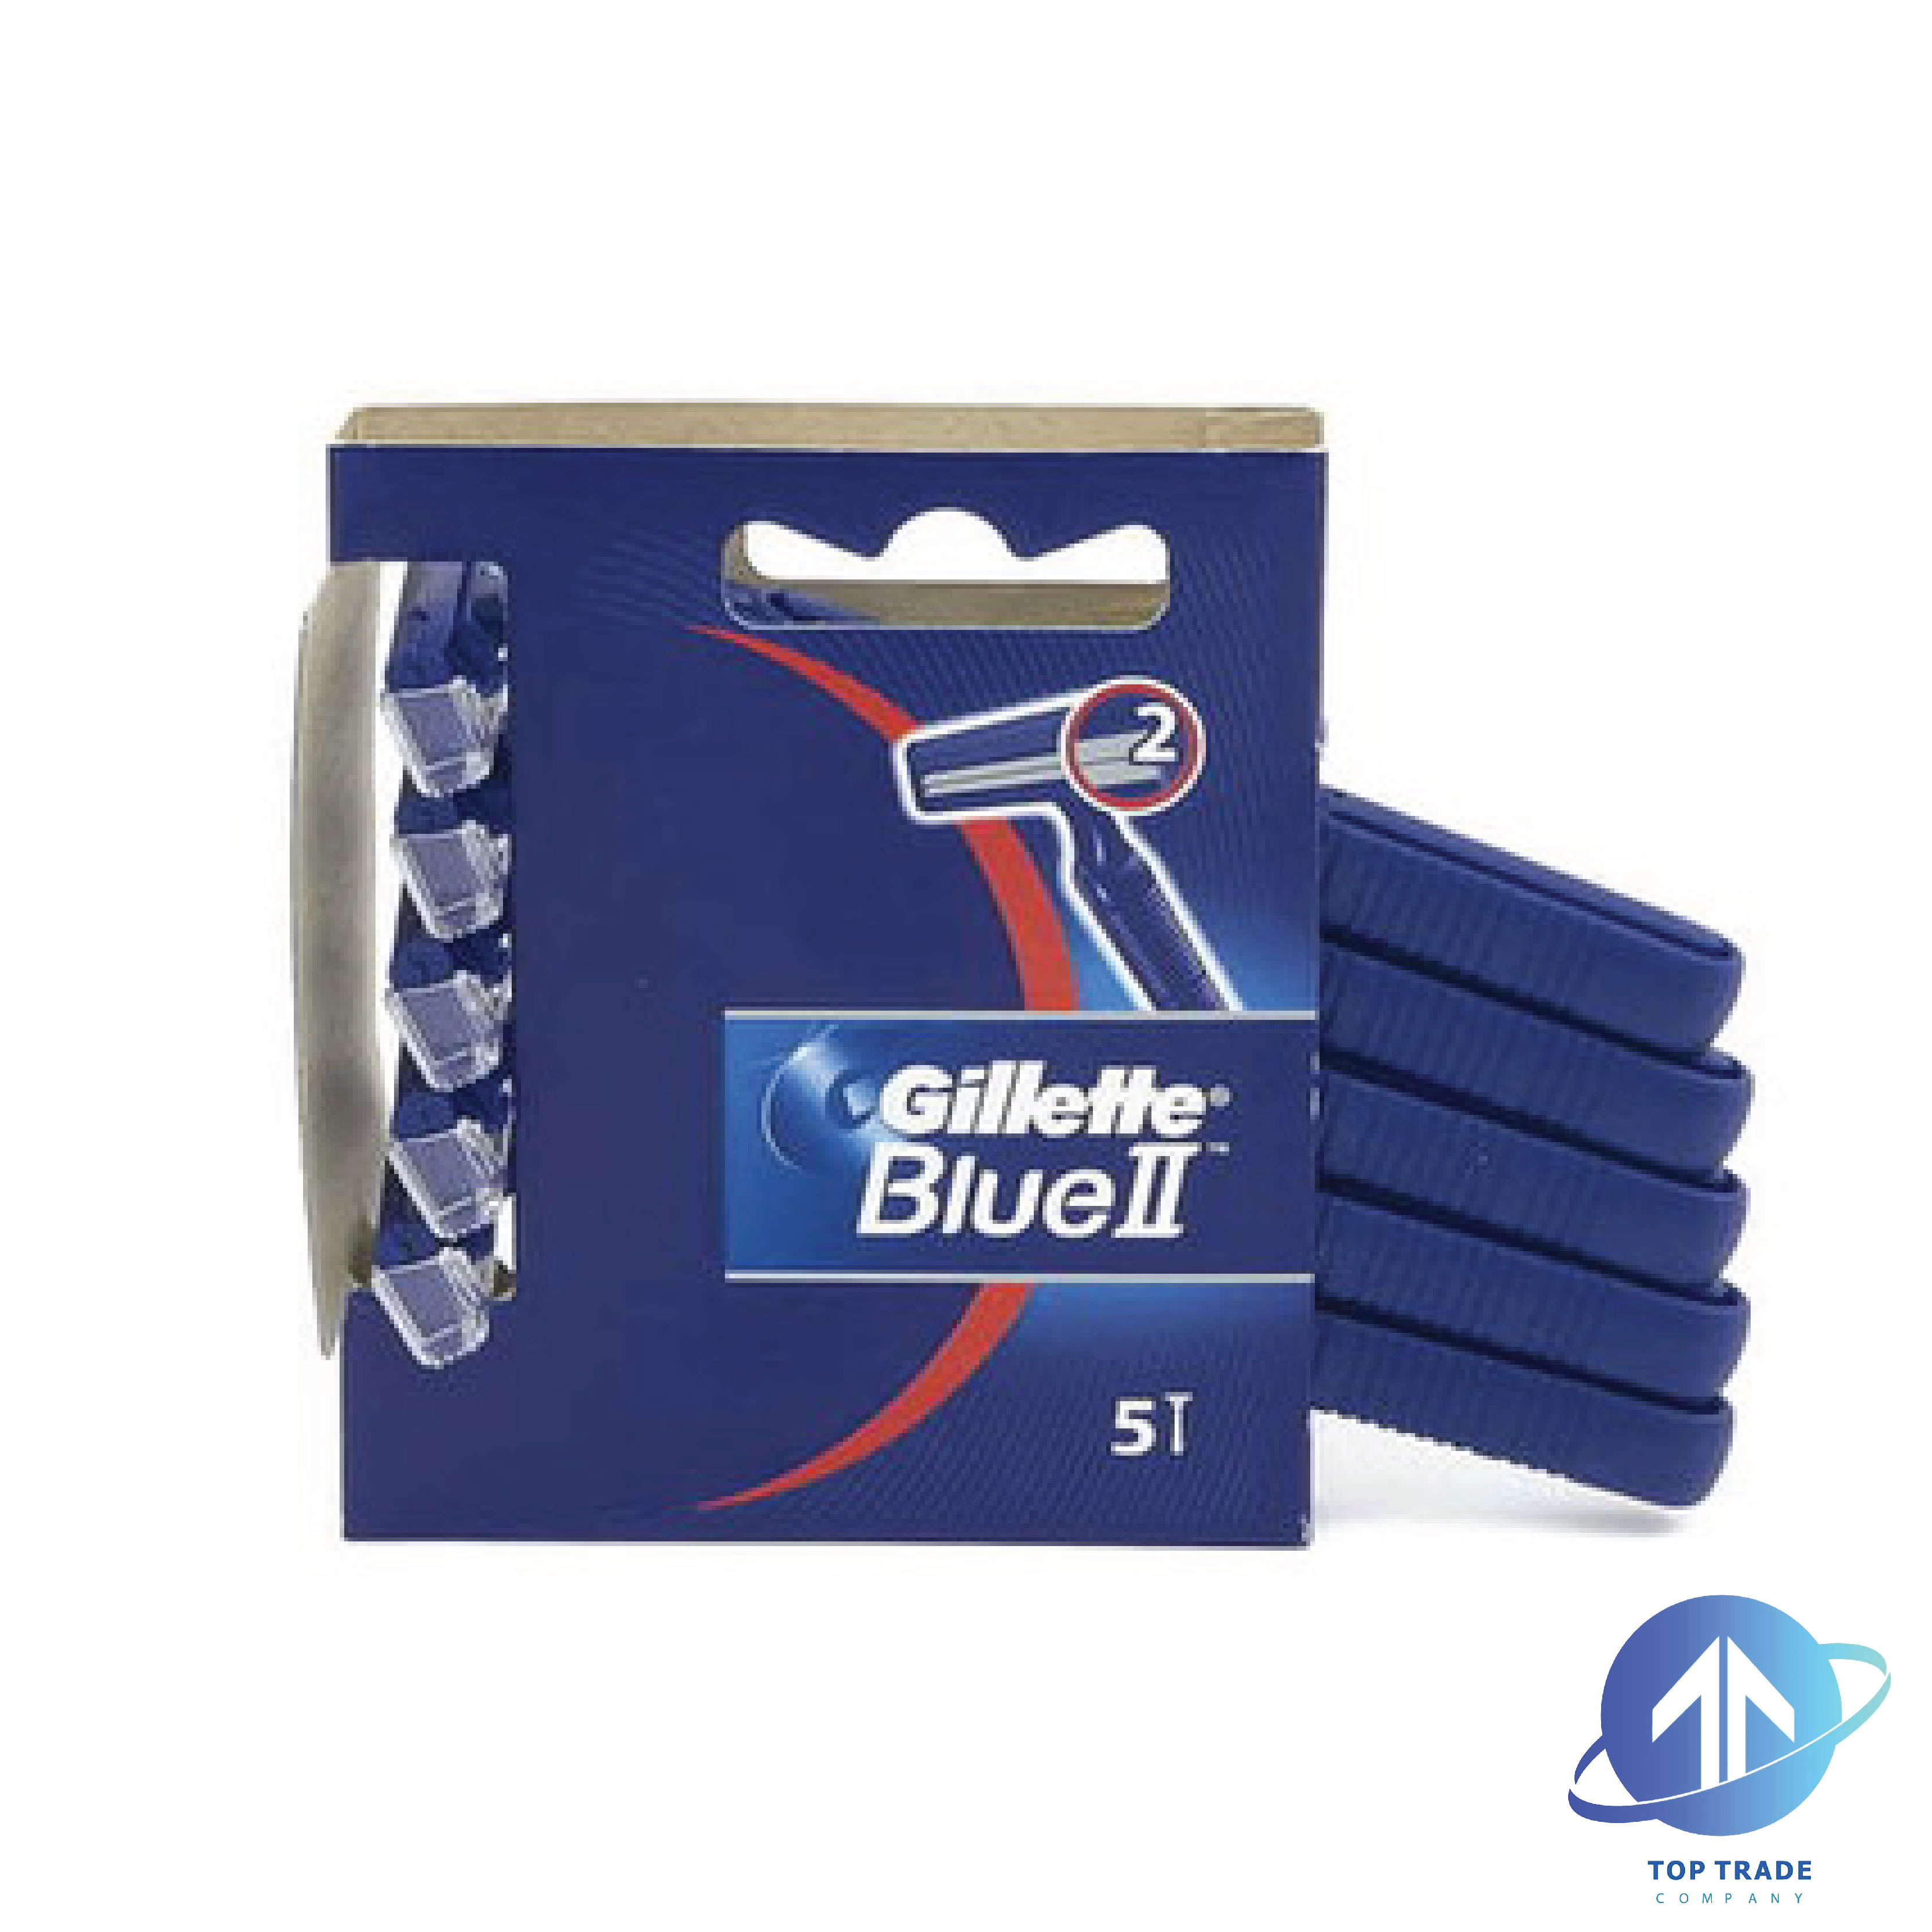 Gillette Blue II disposable razors on card 5pc